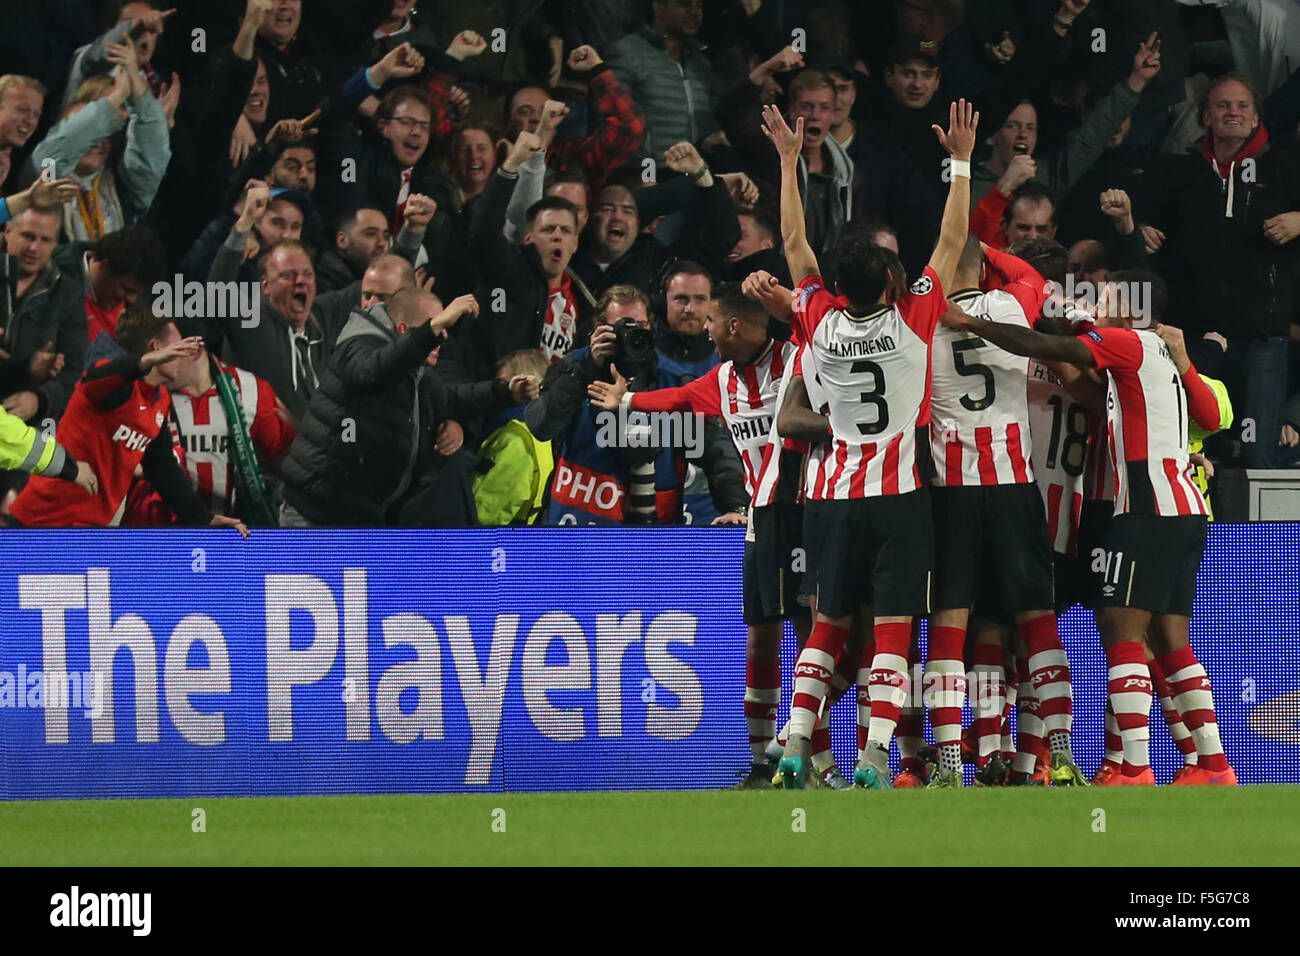 Eindhoven, The Netherlands. 03rd Nov, 2015. Eindhovens players celebrate after 2:0 during the UEFA Champions League Group B soccer match PSV Eindhoven and VfL Wolfsburg at the PSV Stadium in Eindhoven, The Netherlands, 03 November 2015. Photo: Maja Hitij/dpa/Alamy Live News Stock Photo